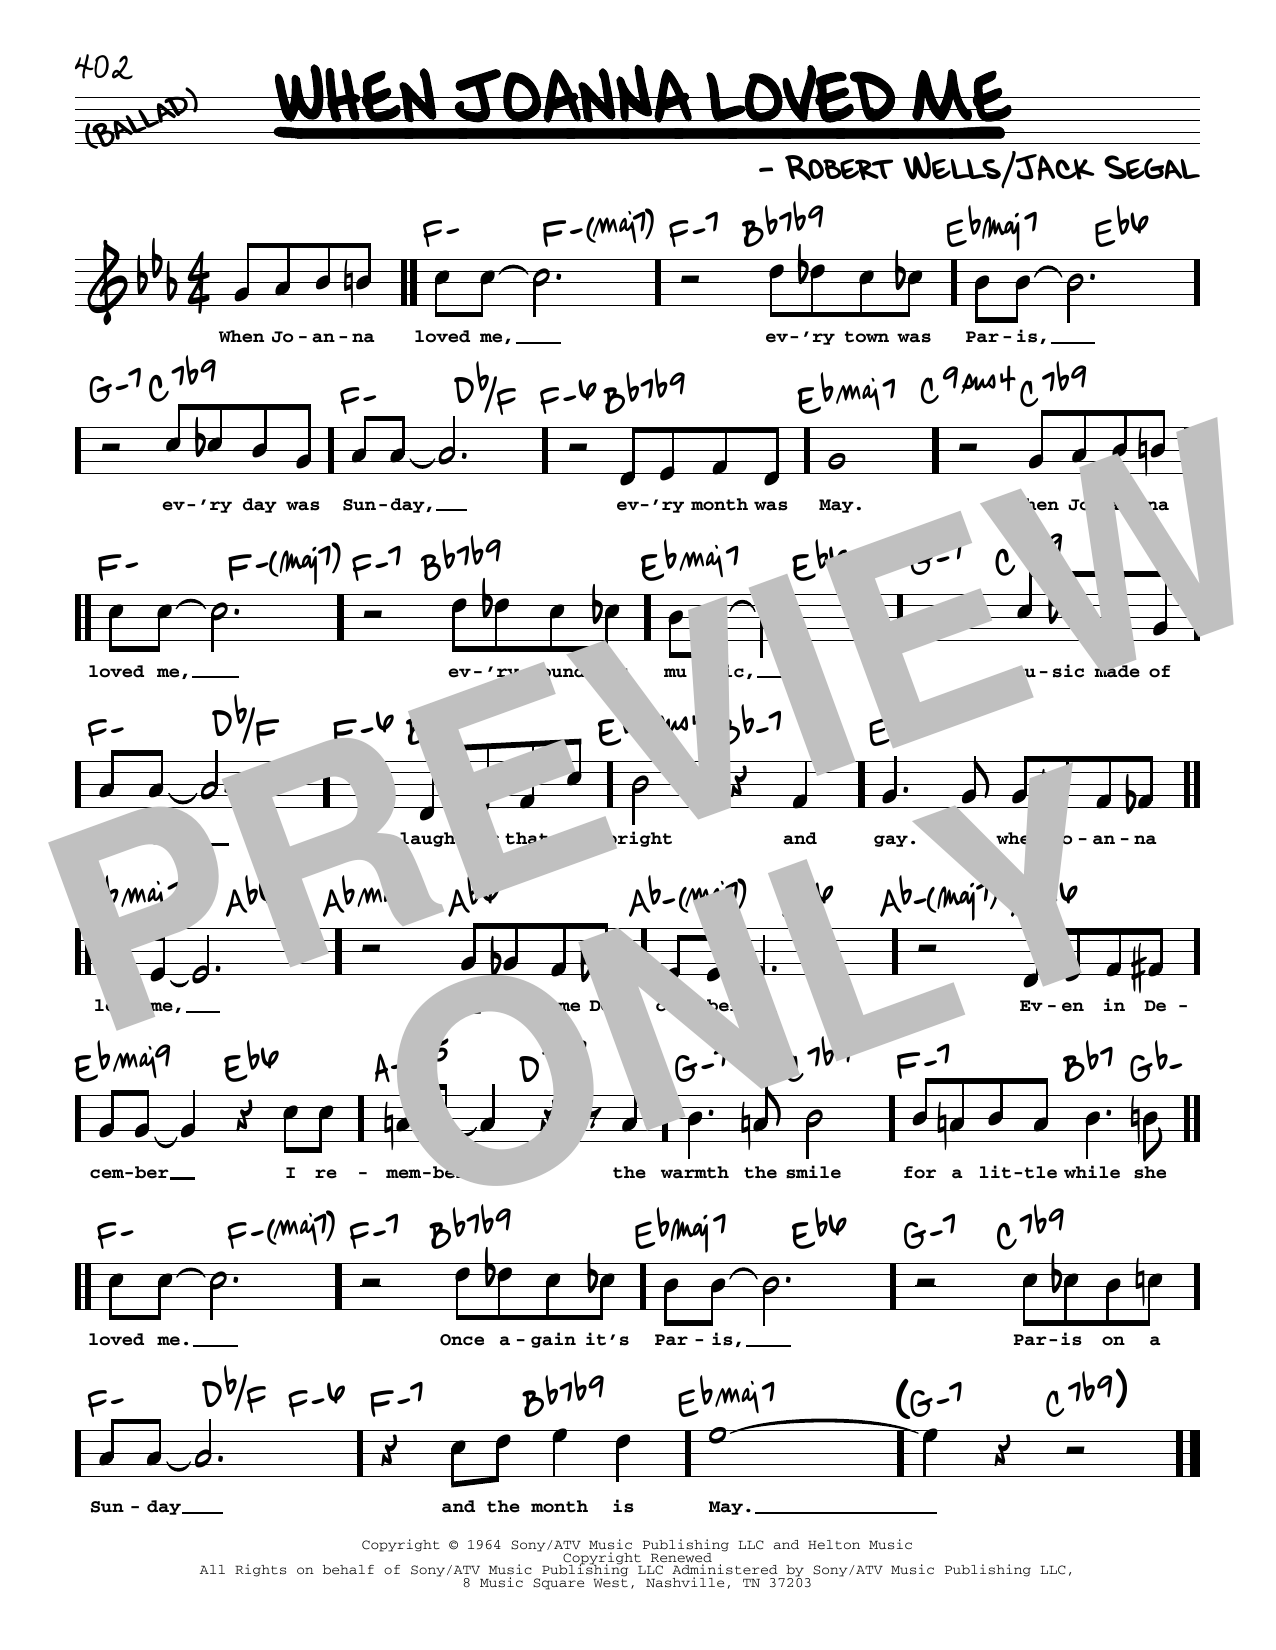 Download Jack Segal and Robert Wells When Joanna Loved Me (High Voice) Sheet Music